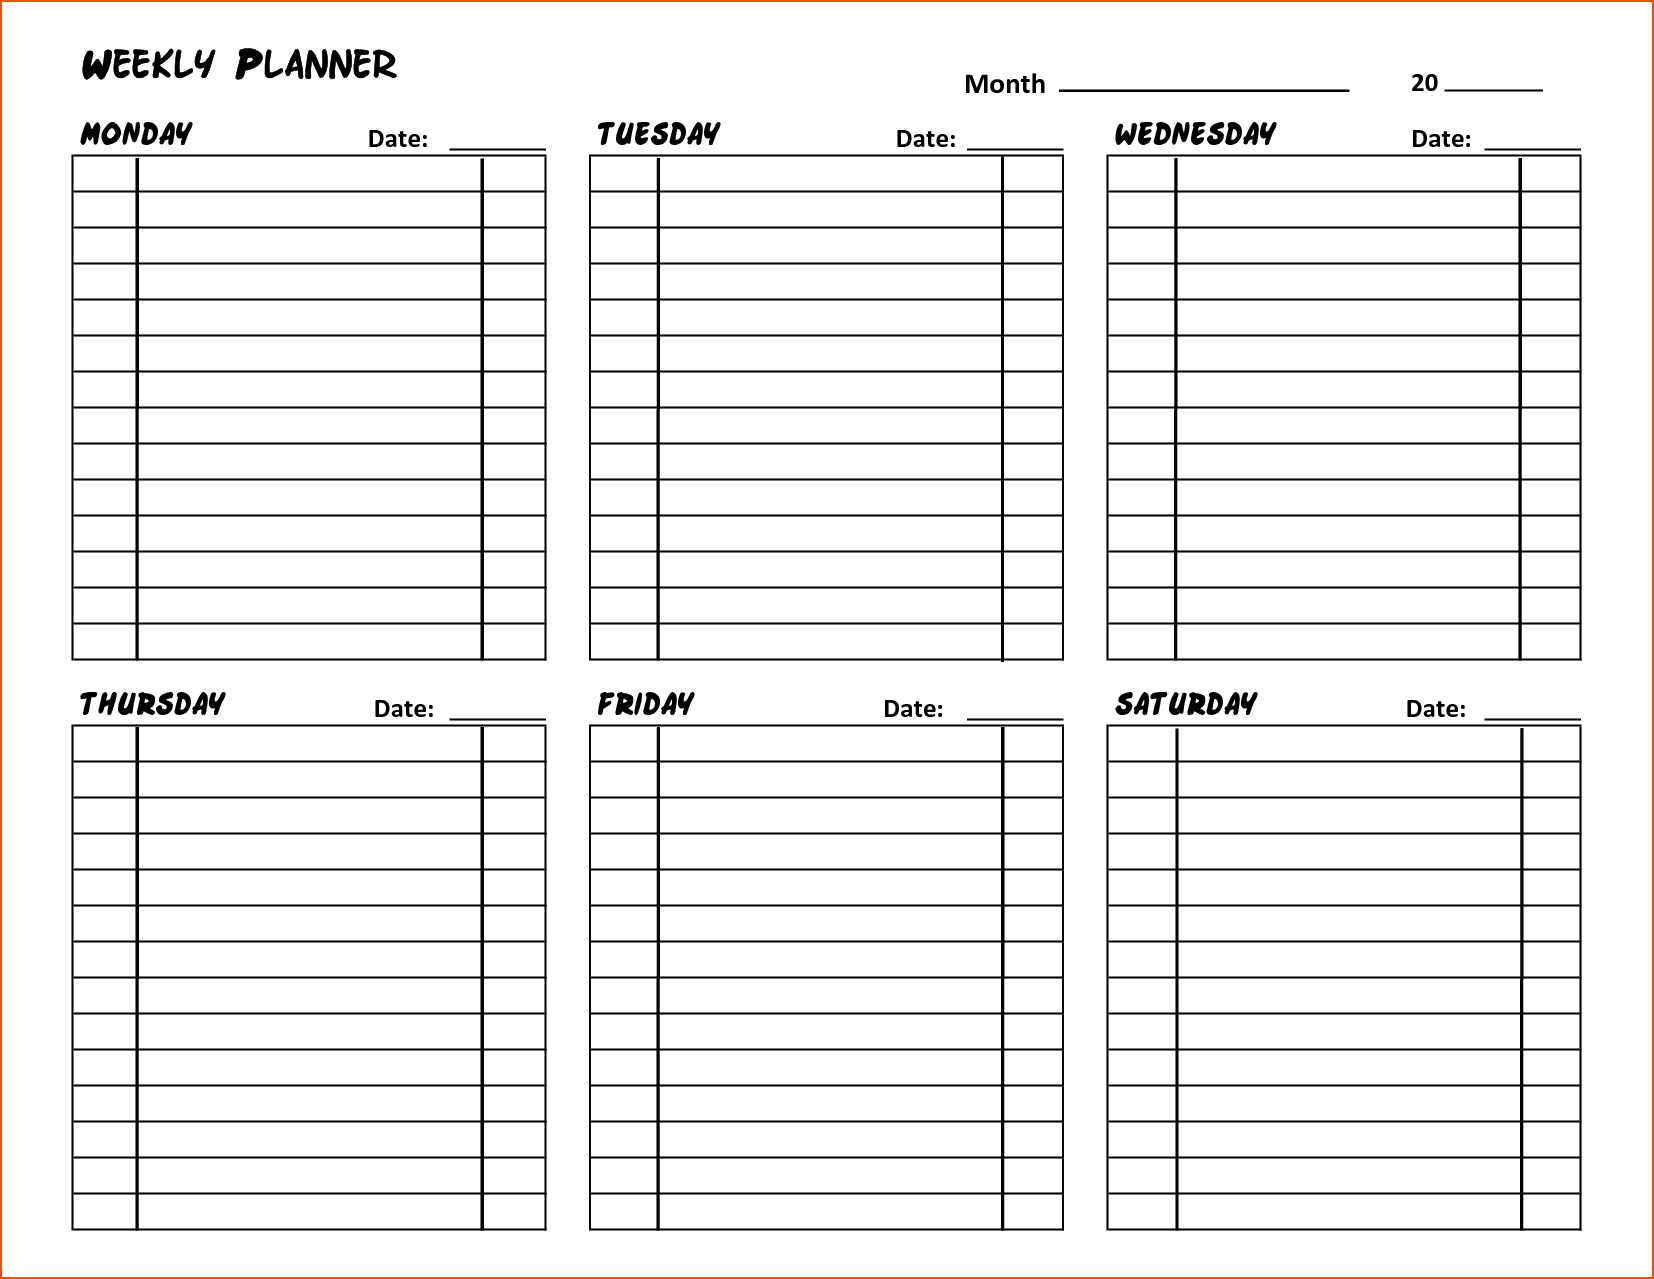 Schedule Template Free Day Work Activity Scheduling Or Daily